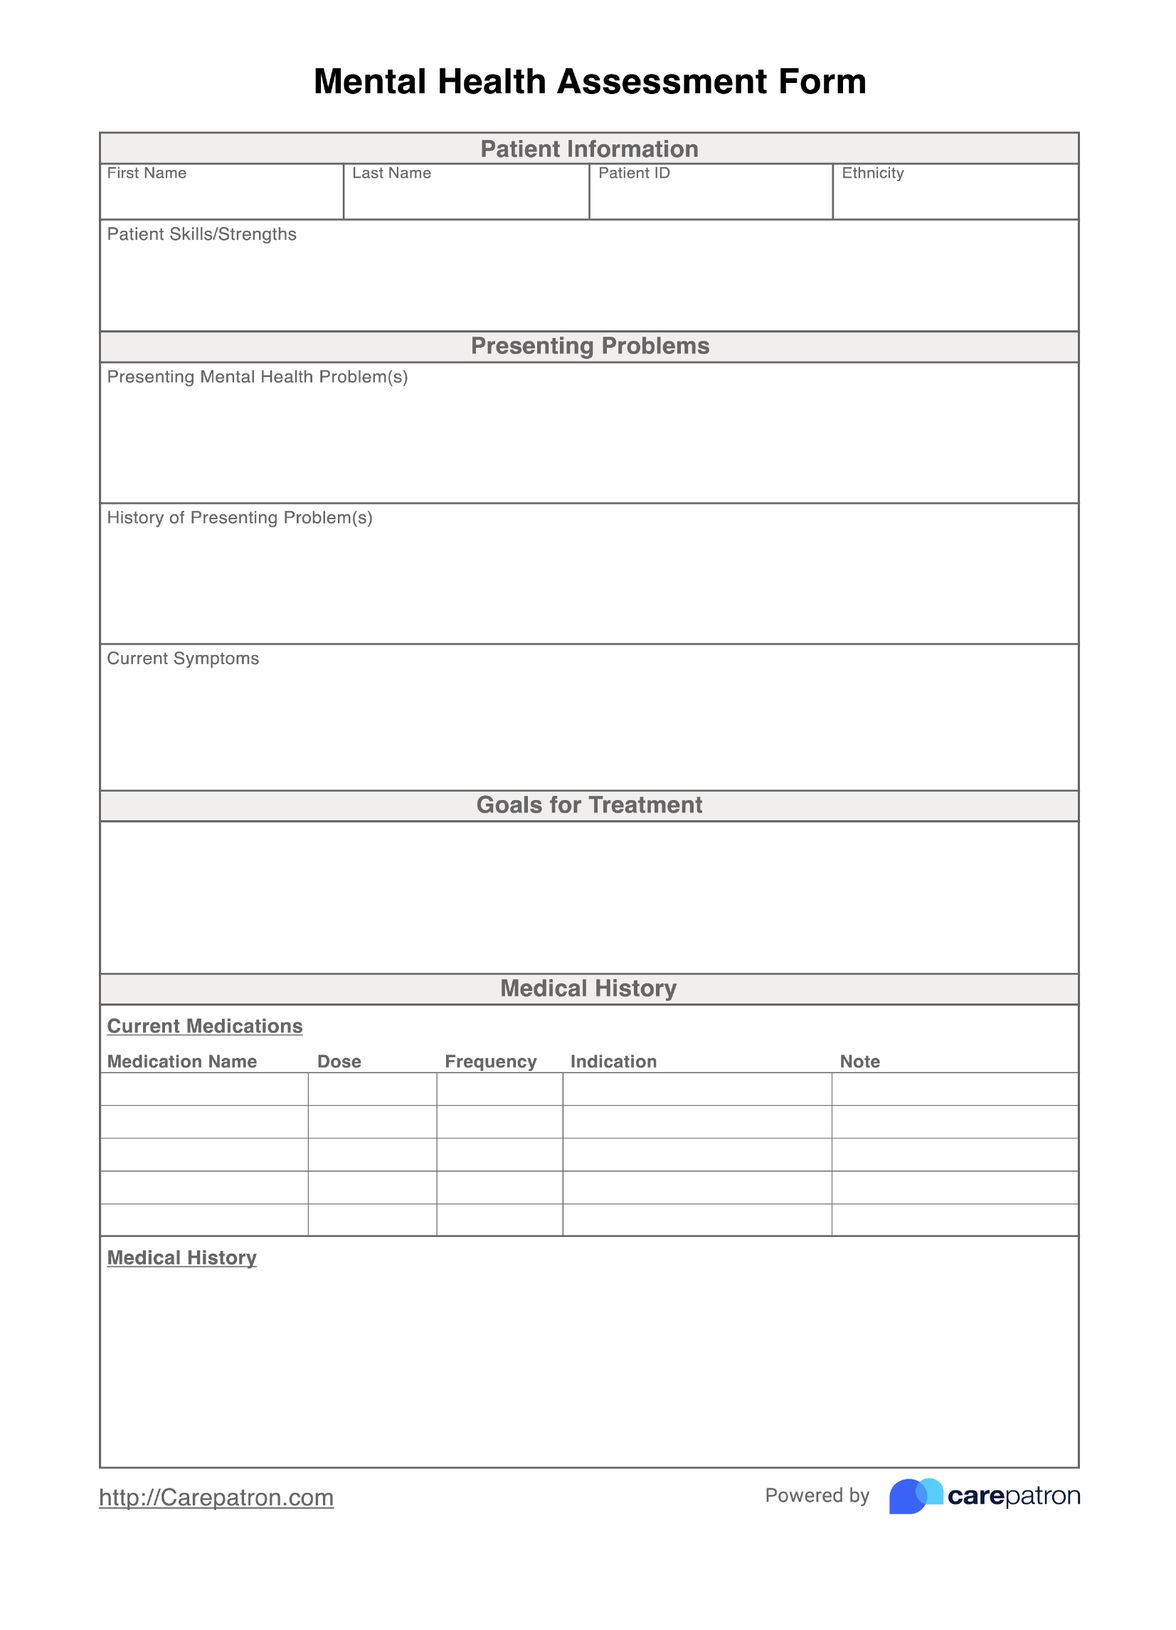 Mental Health Assessment Form PDF Example